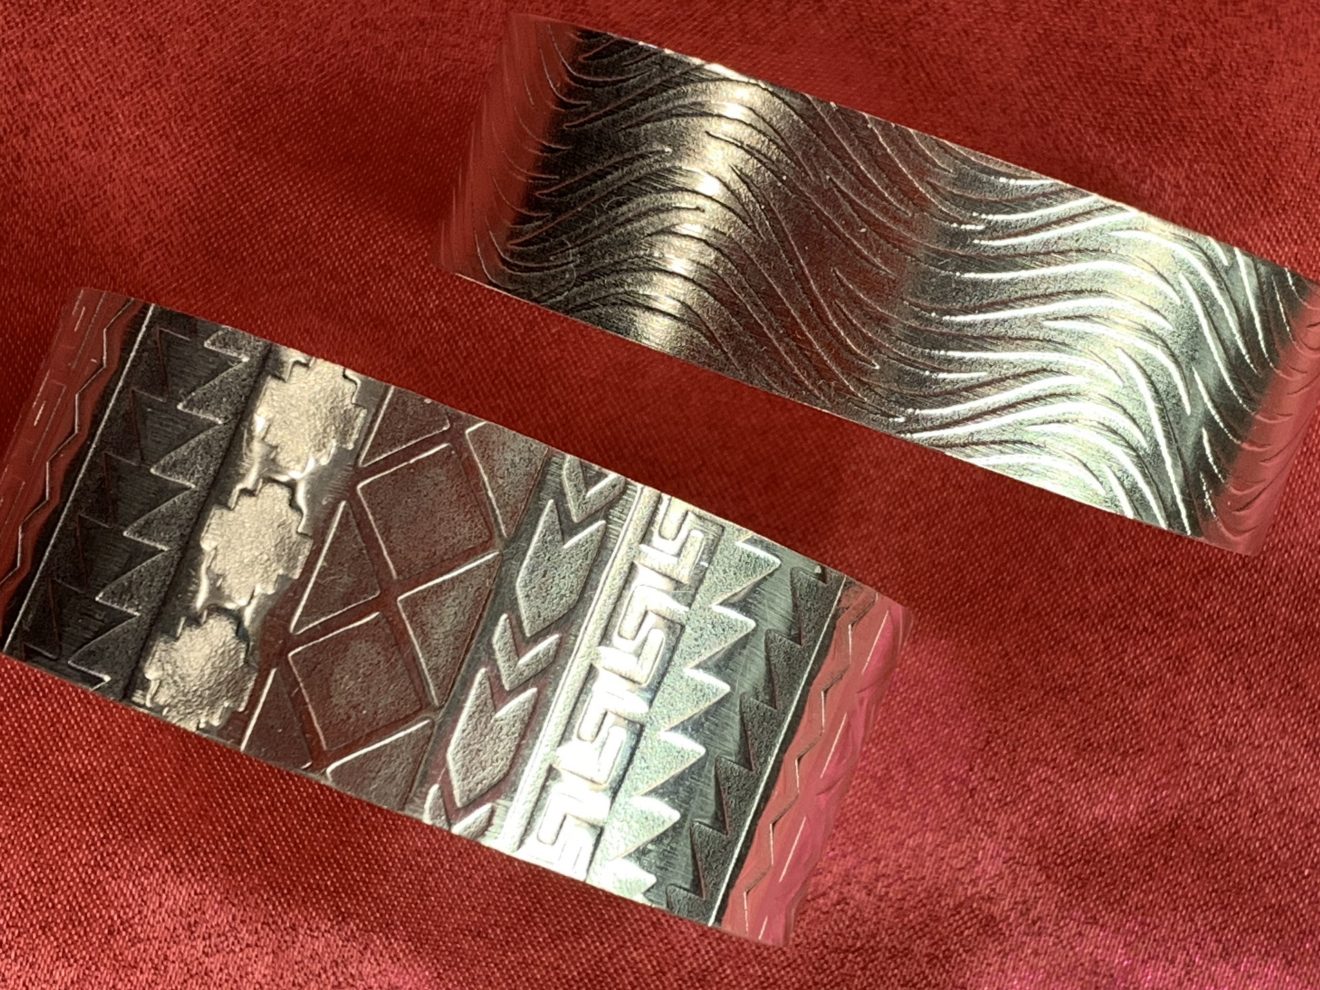 Closeup of two silver cuffs on a red background.